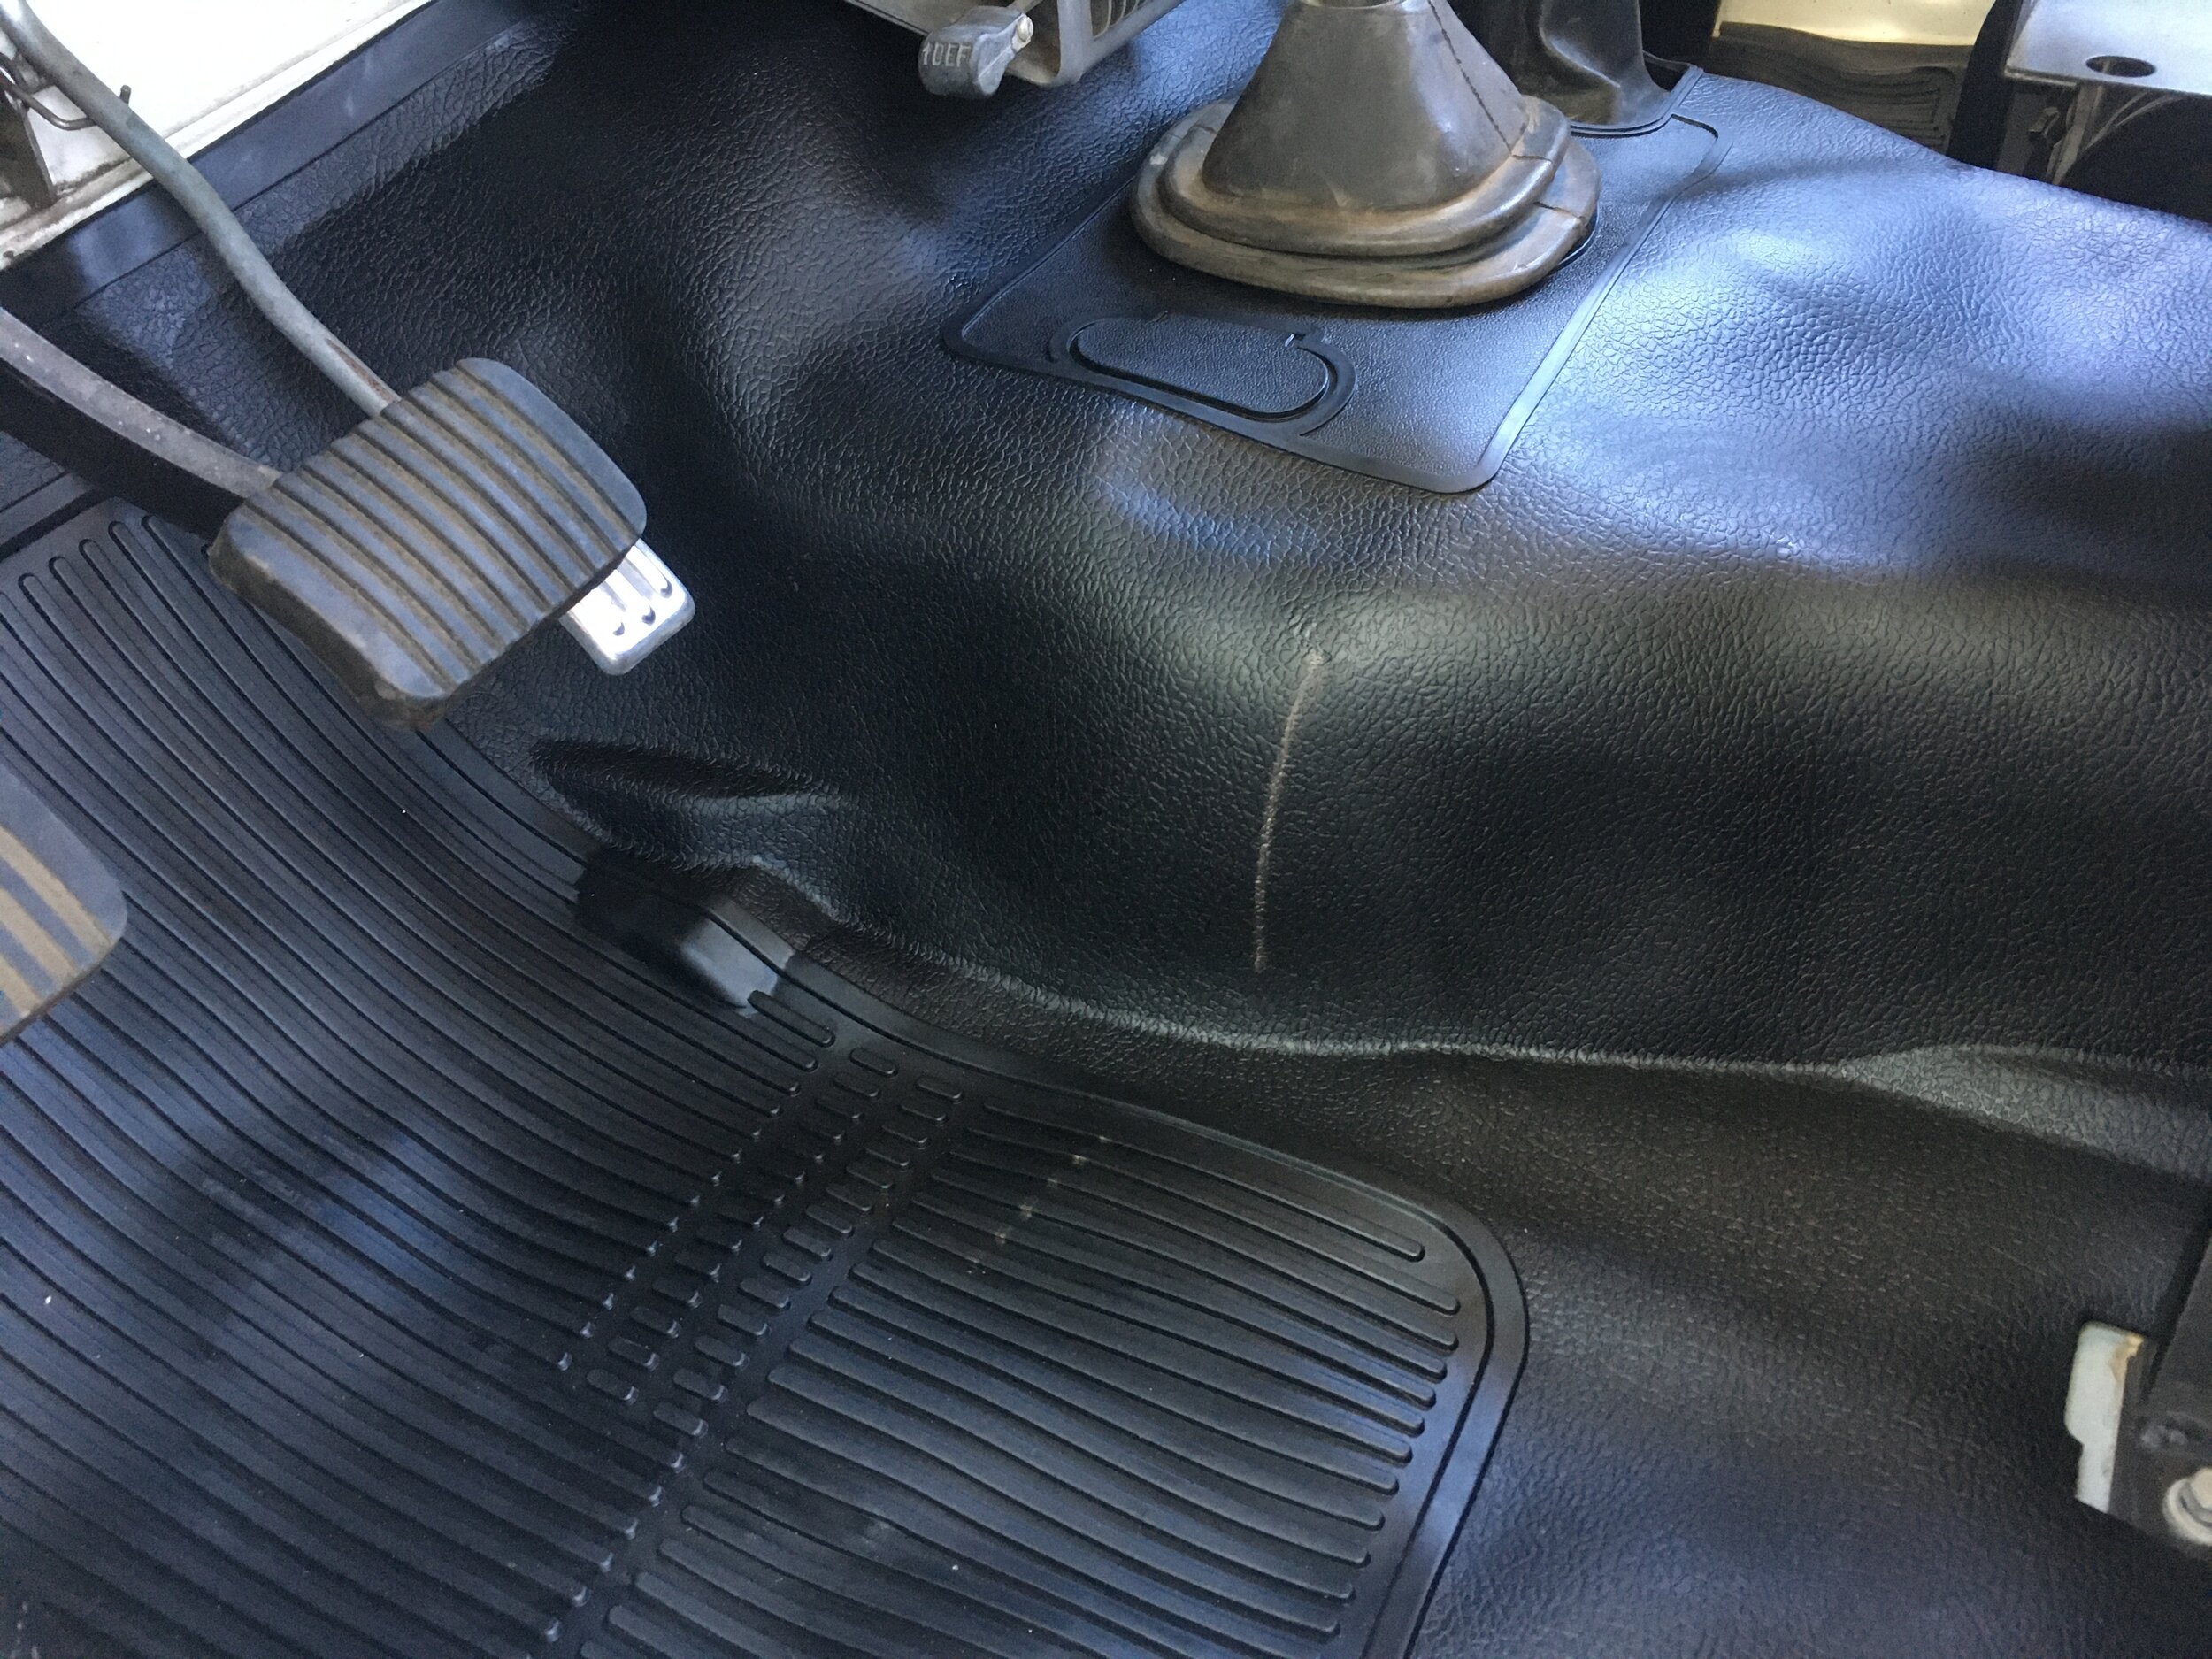 City Racer's high-quality floor mats (and other parts) for the